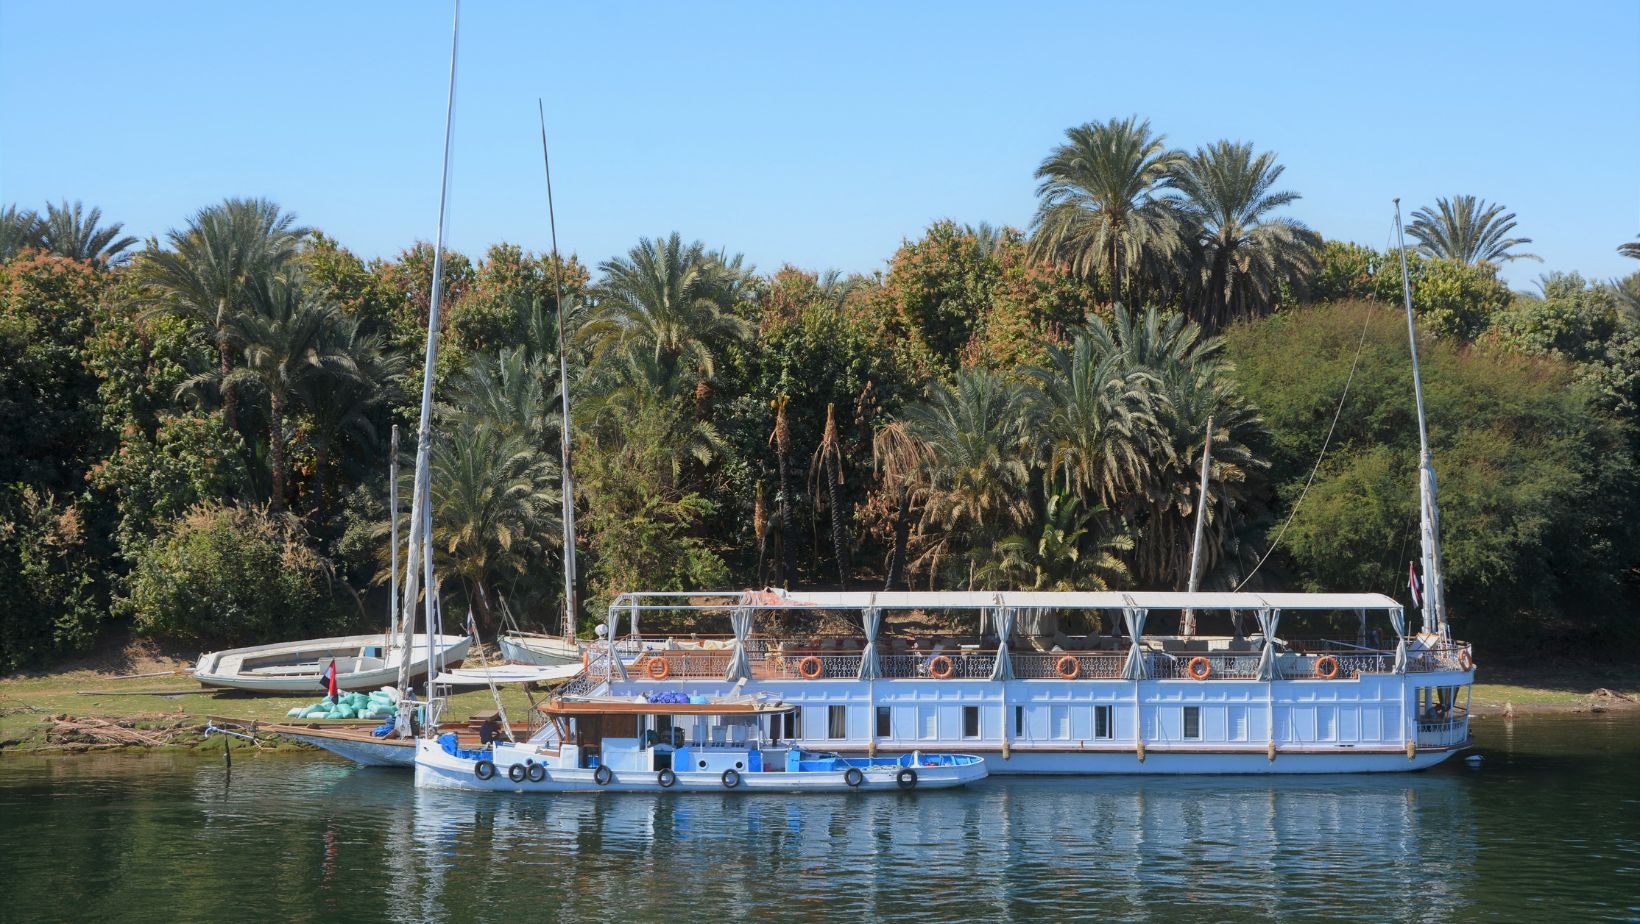 Activities and Services You May Try on a Nile Cruise Boat in Egypt